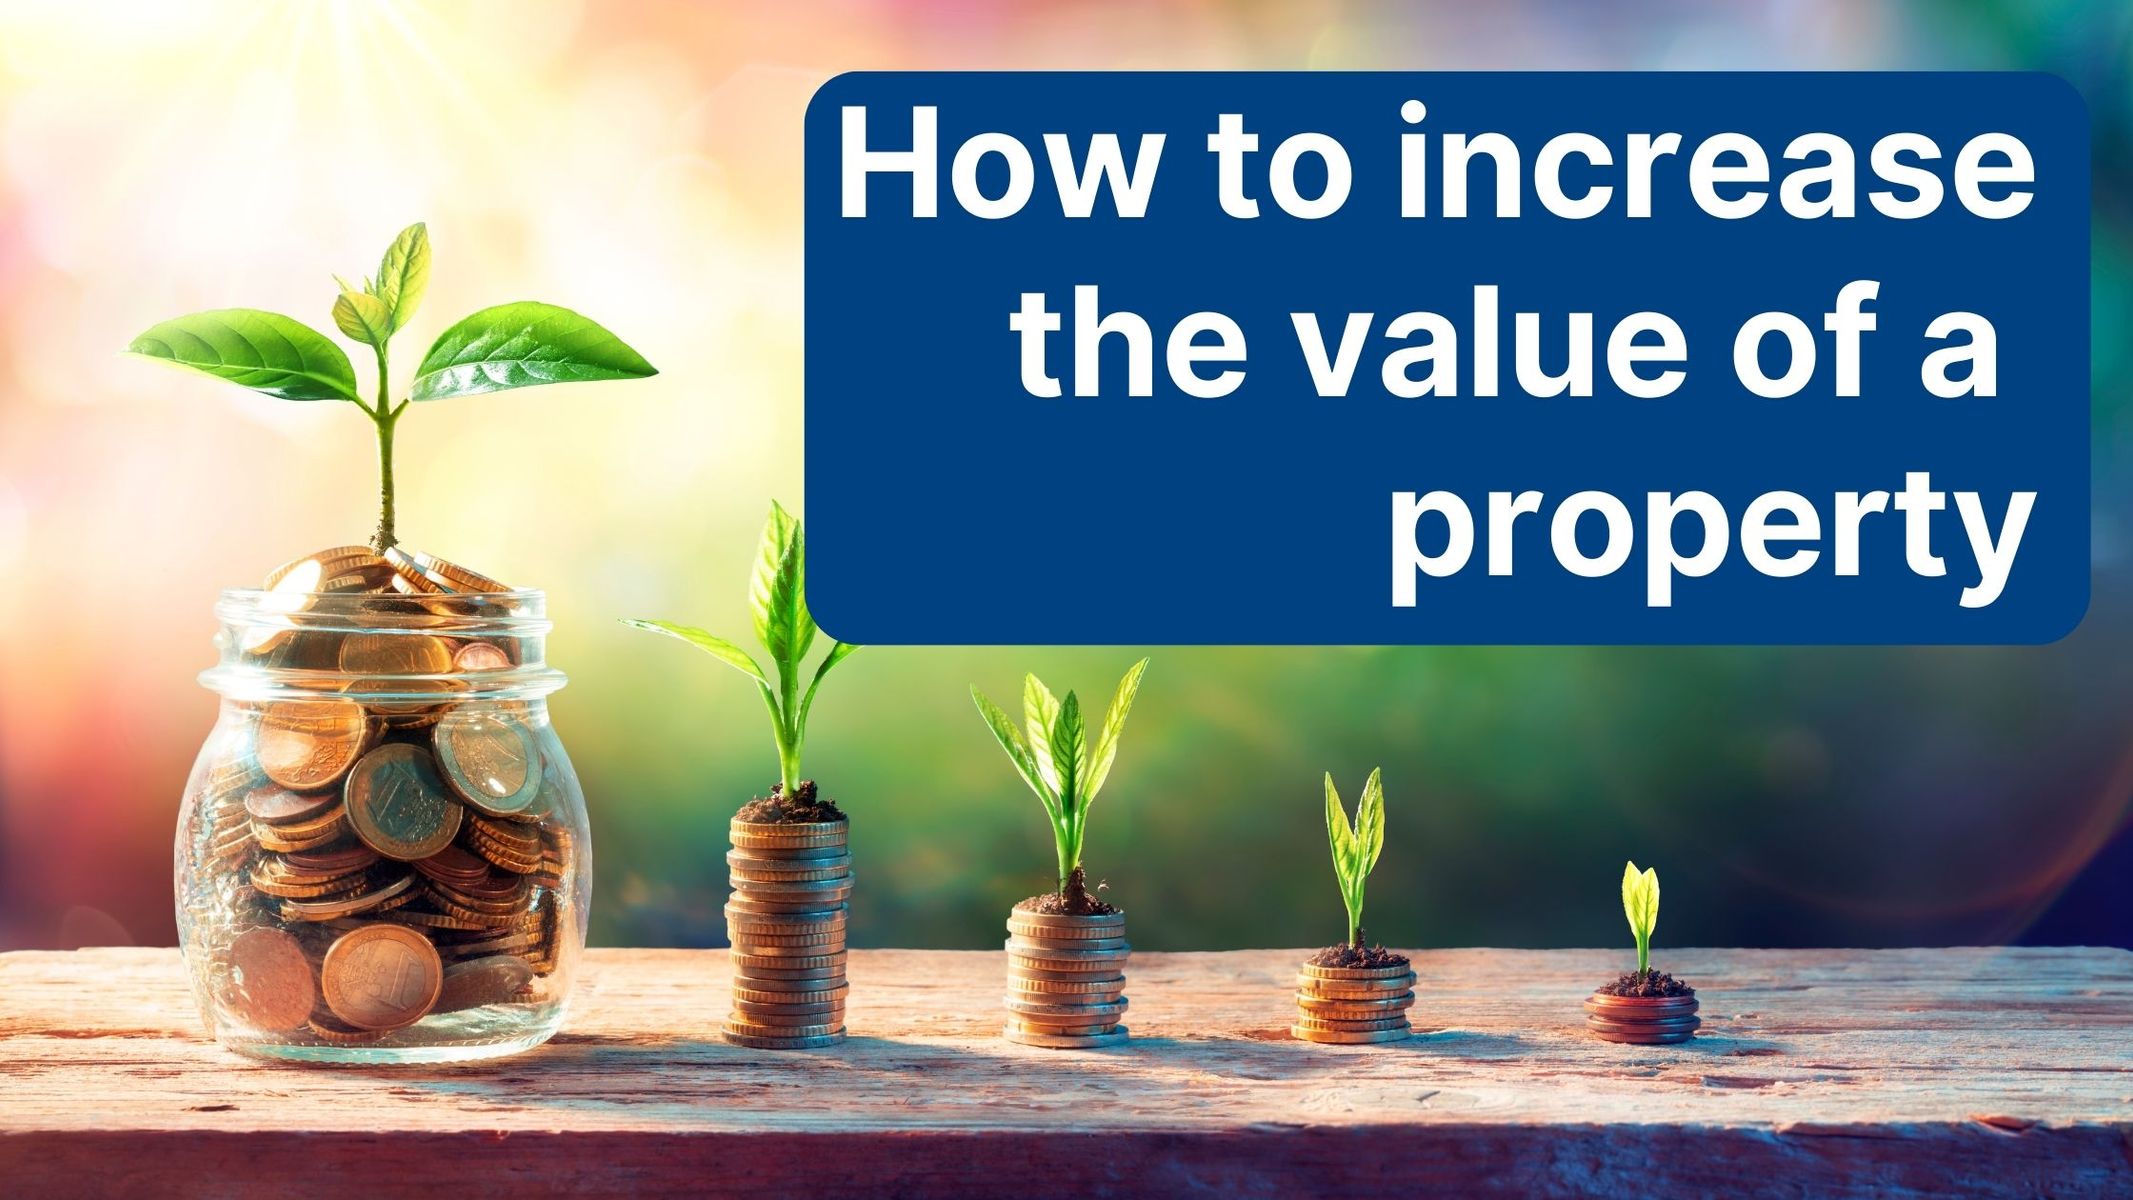 How to increase the value of a property?